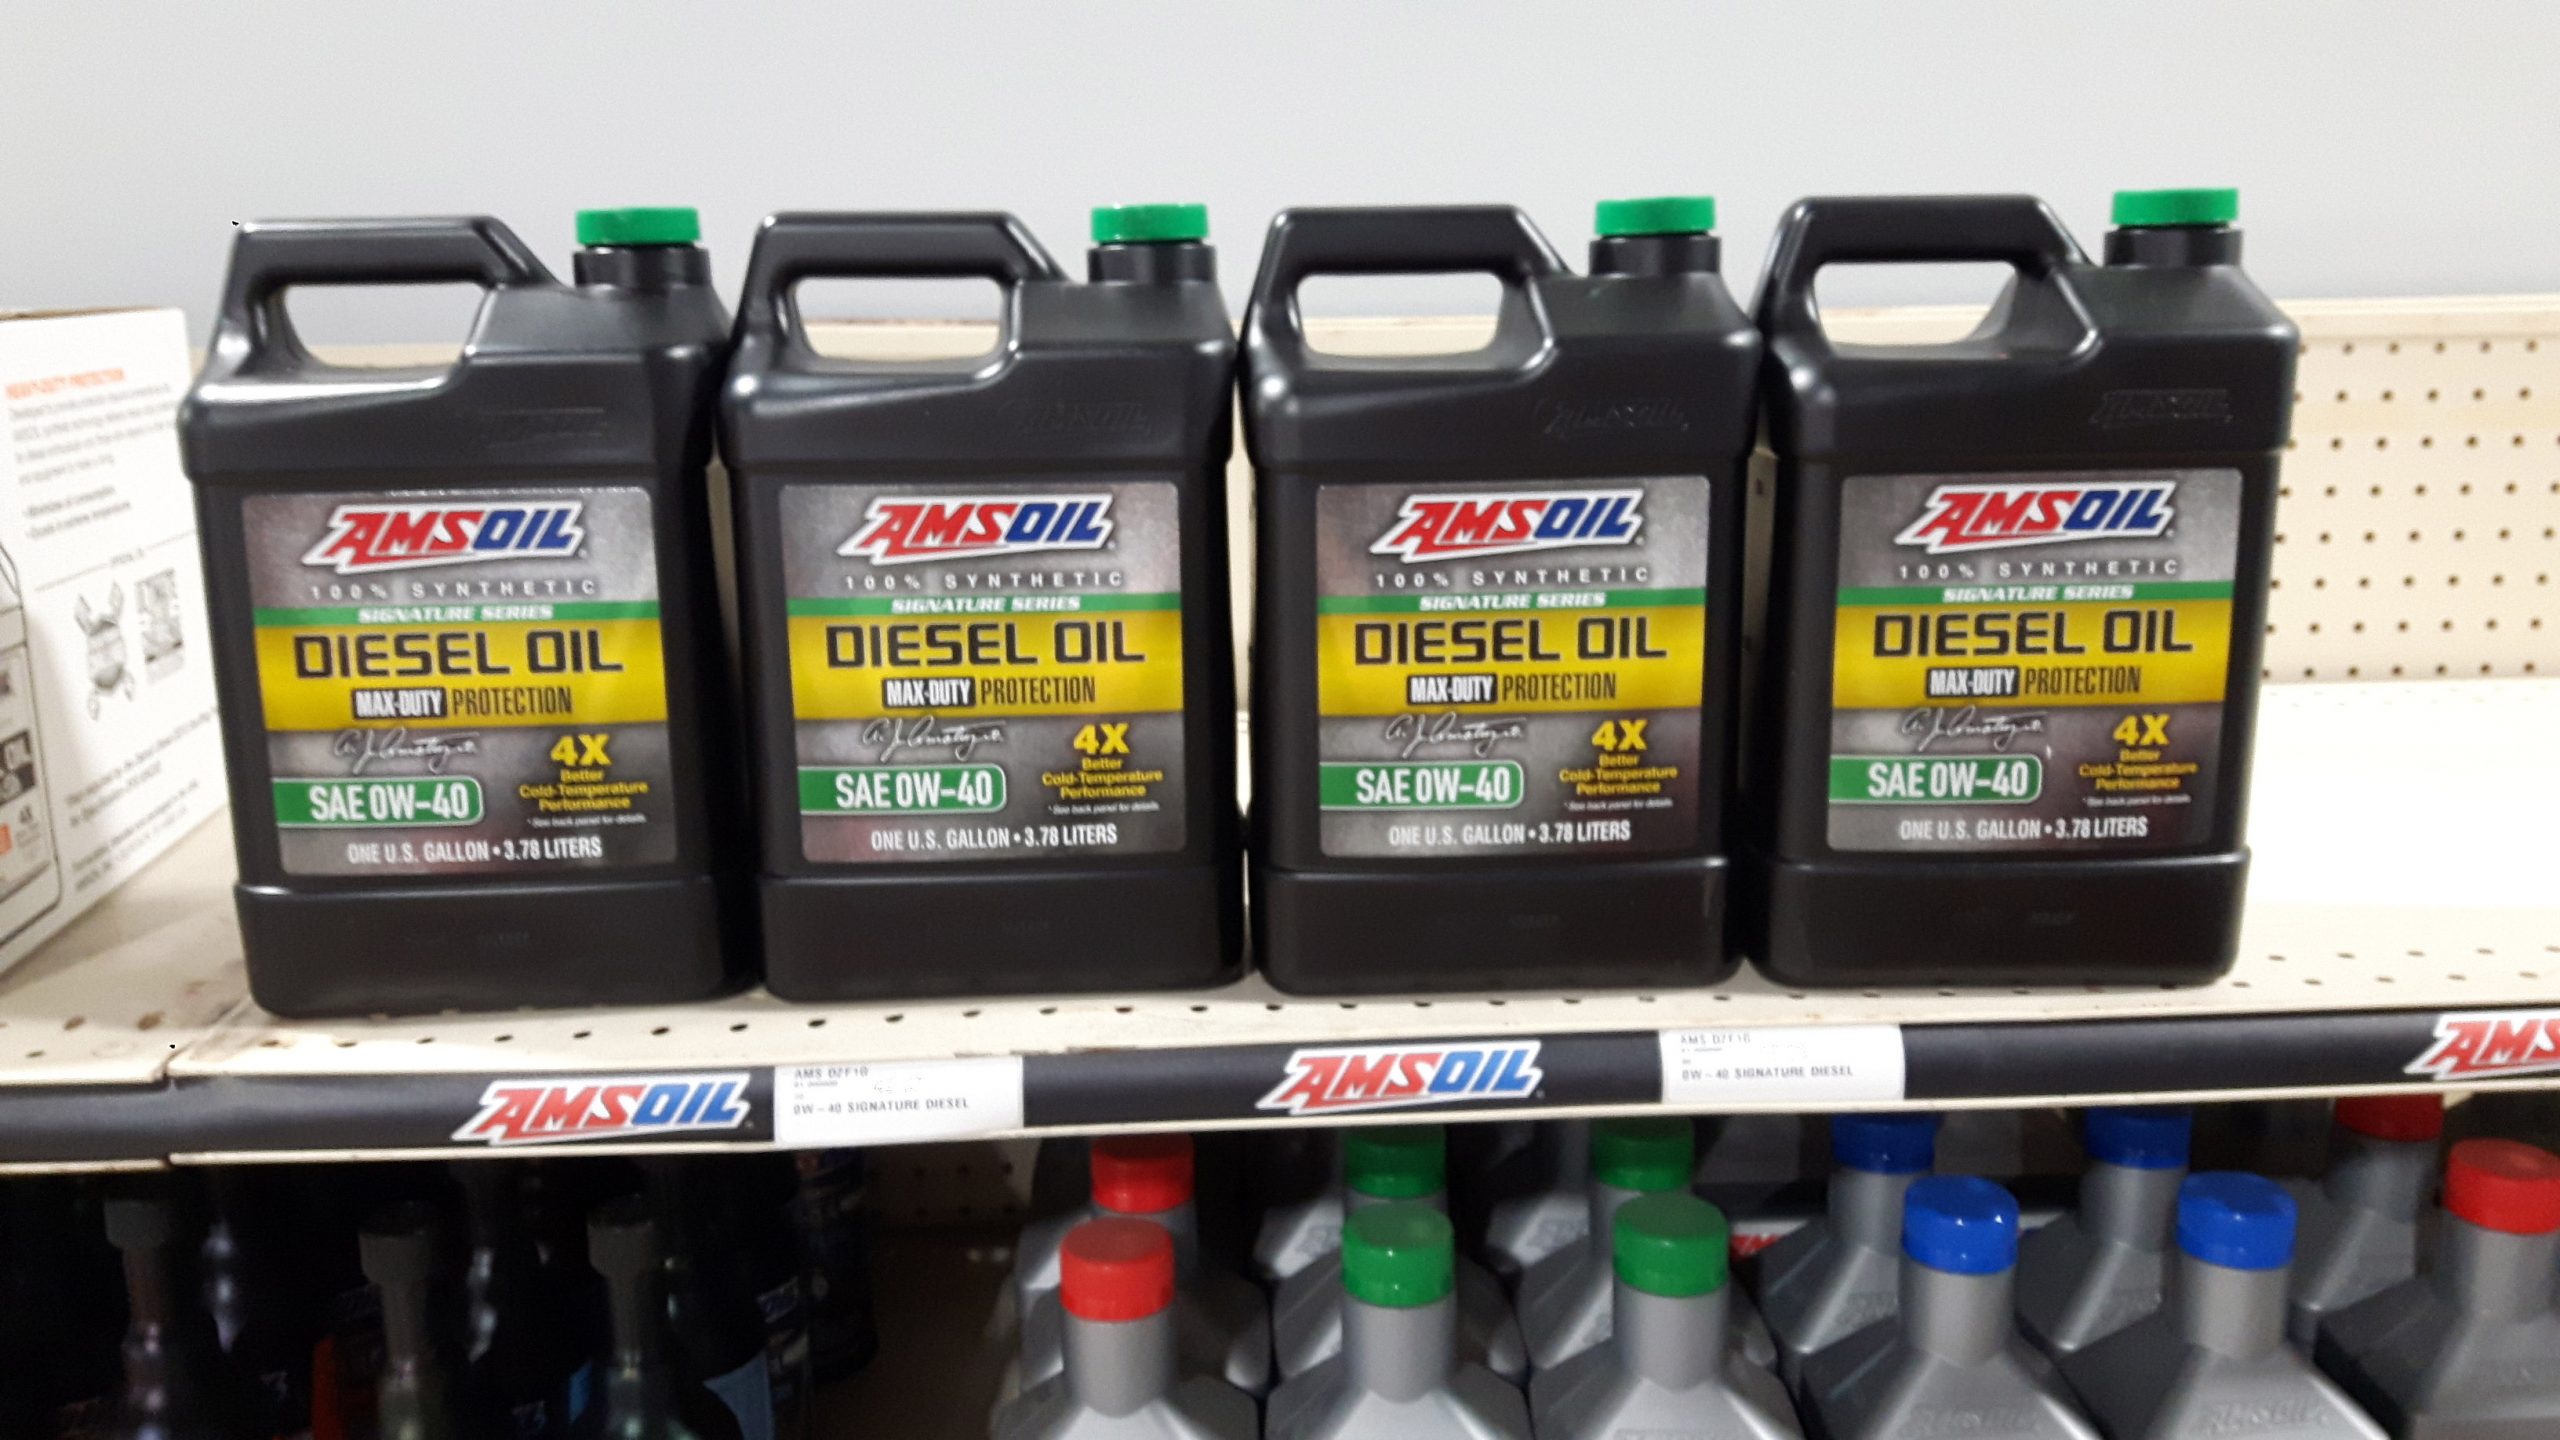 0w-40 solves cold start problems on any diesel